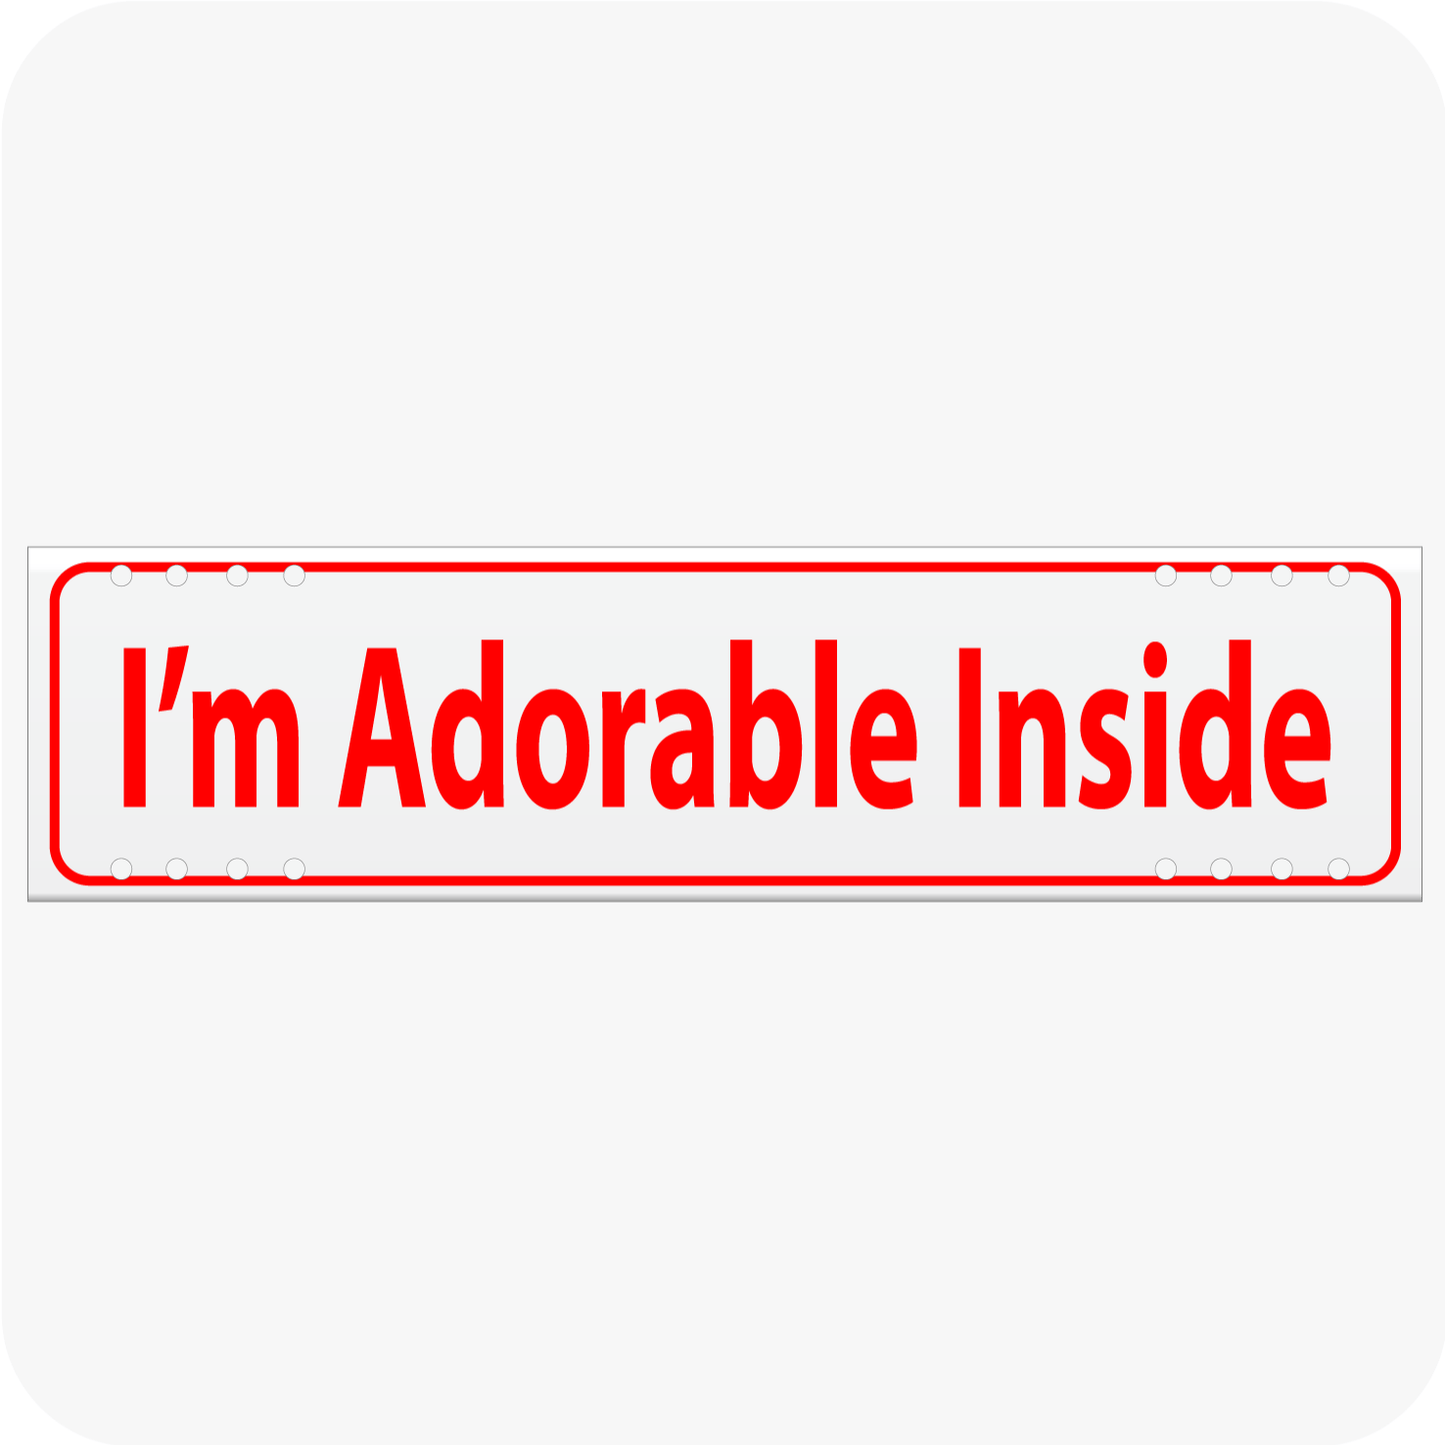 I'm Adorable Inside 6 x 24 Corrugated Rider - Red